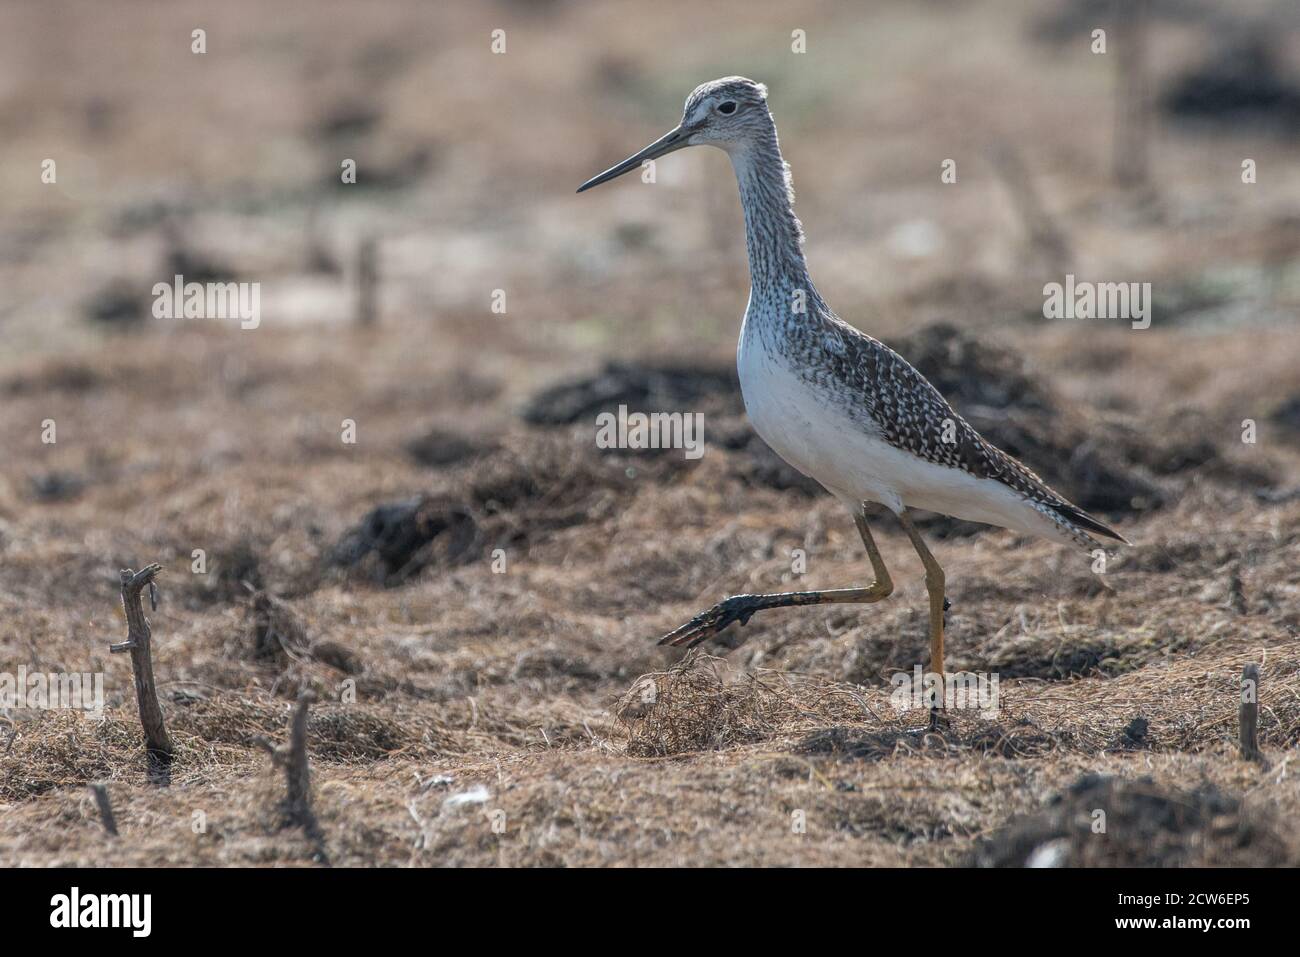 A greater yellowlegs (Tringa melanoleuca), a shore bird, that was near a cattle pond in Briones Regional Park in Contra Costa County, California. Stock Photo